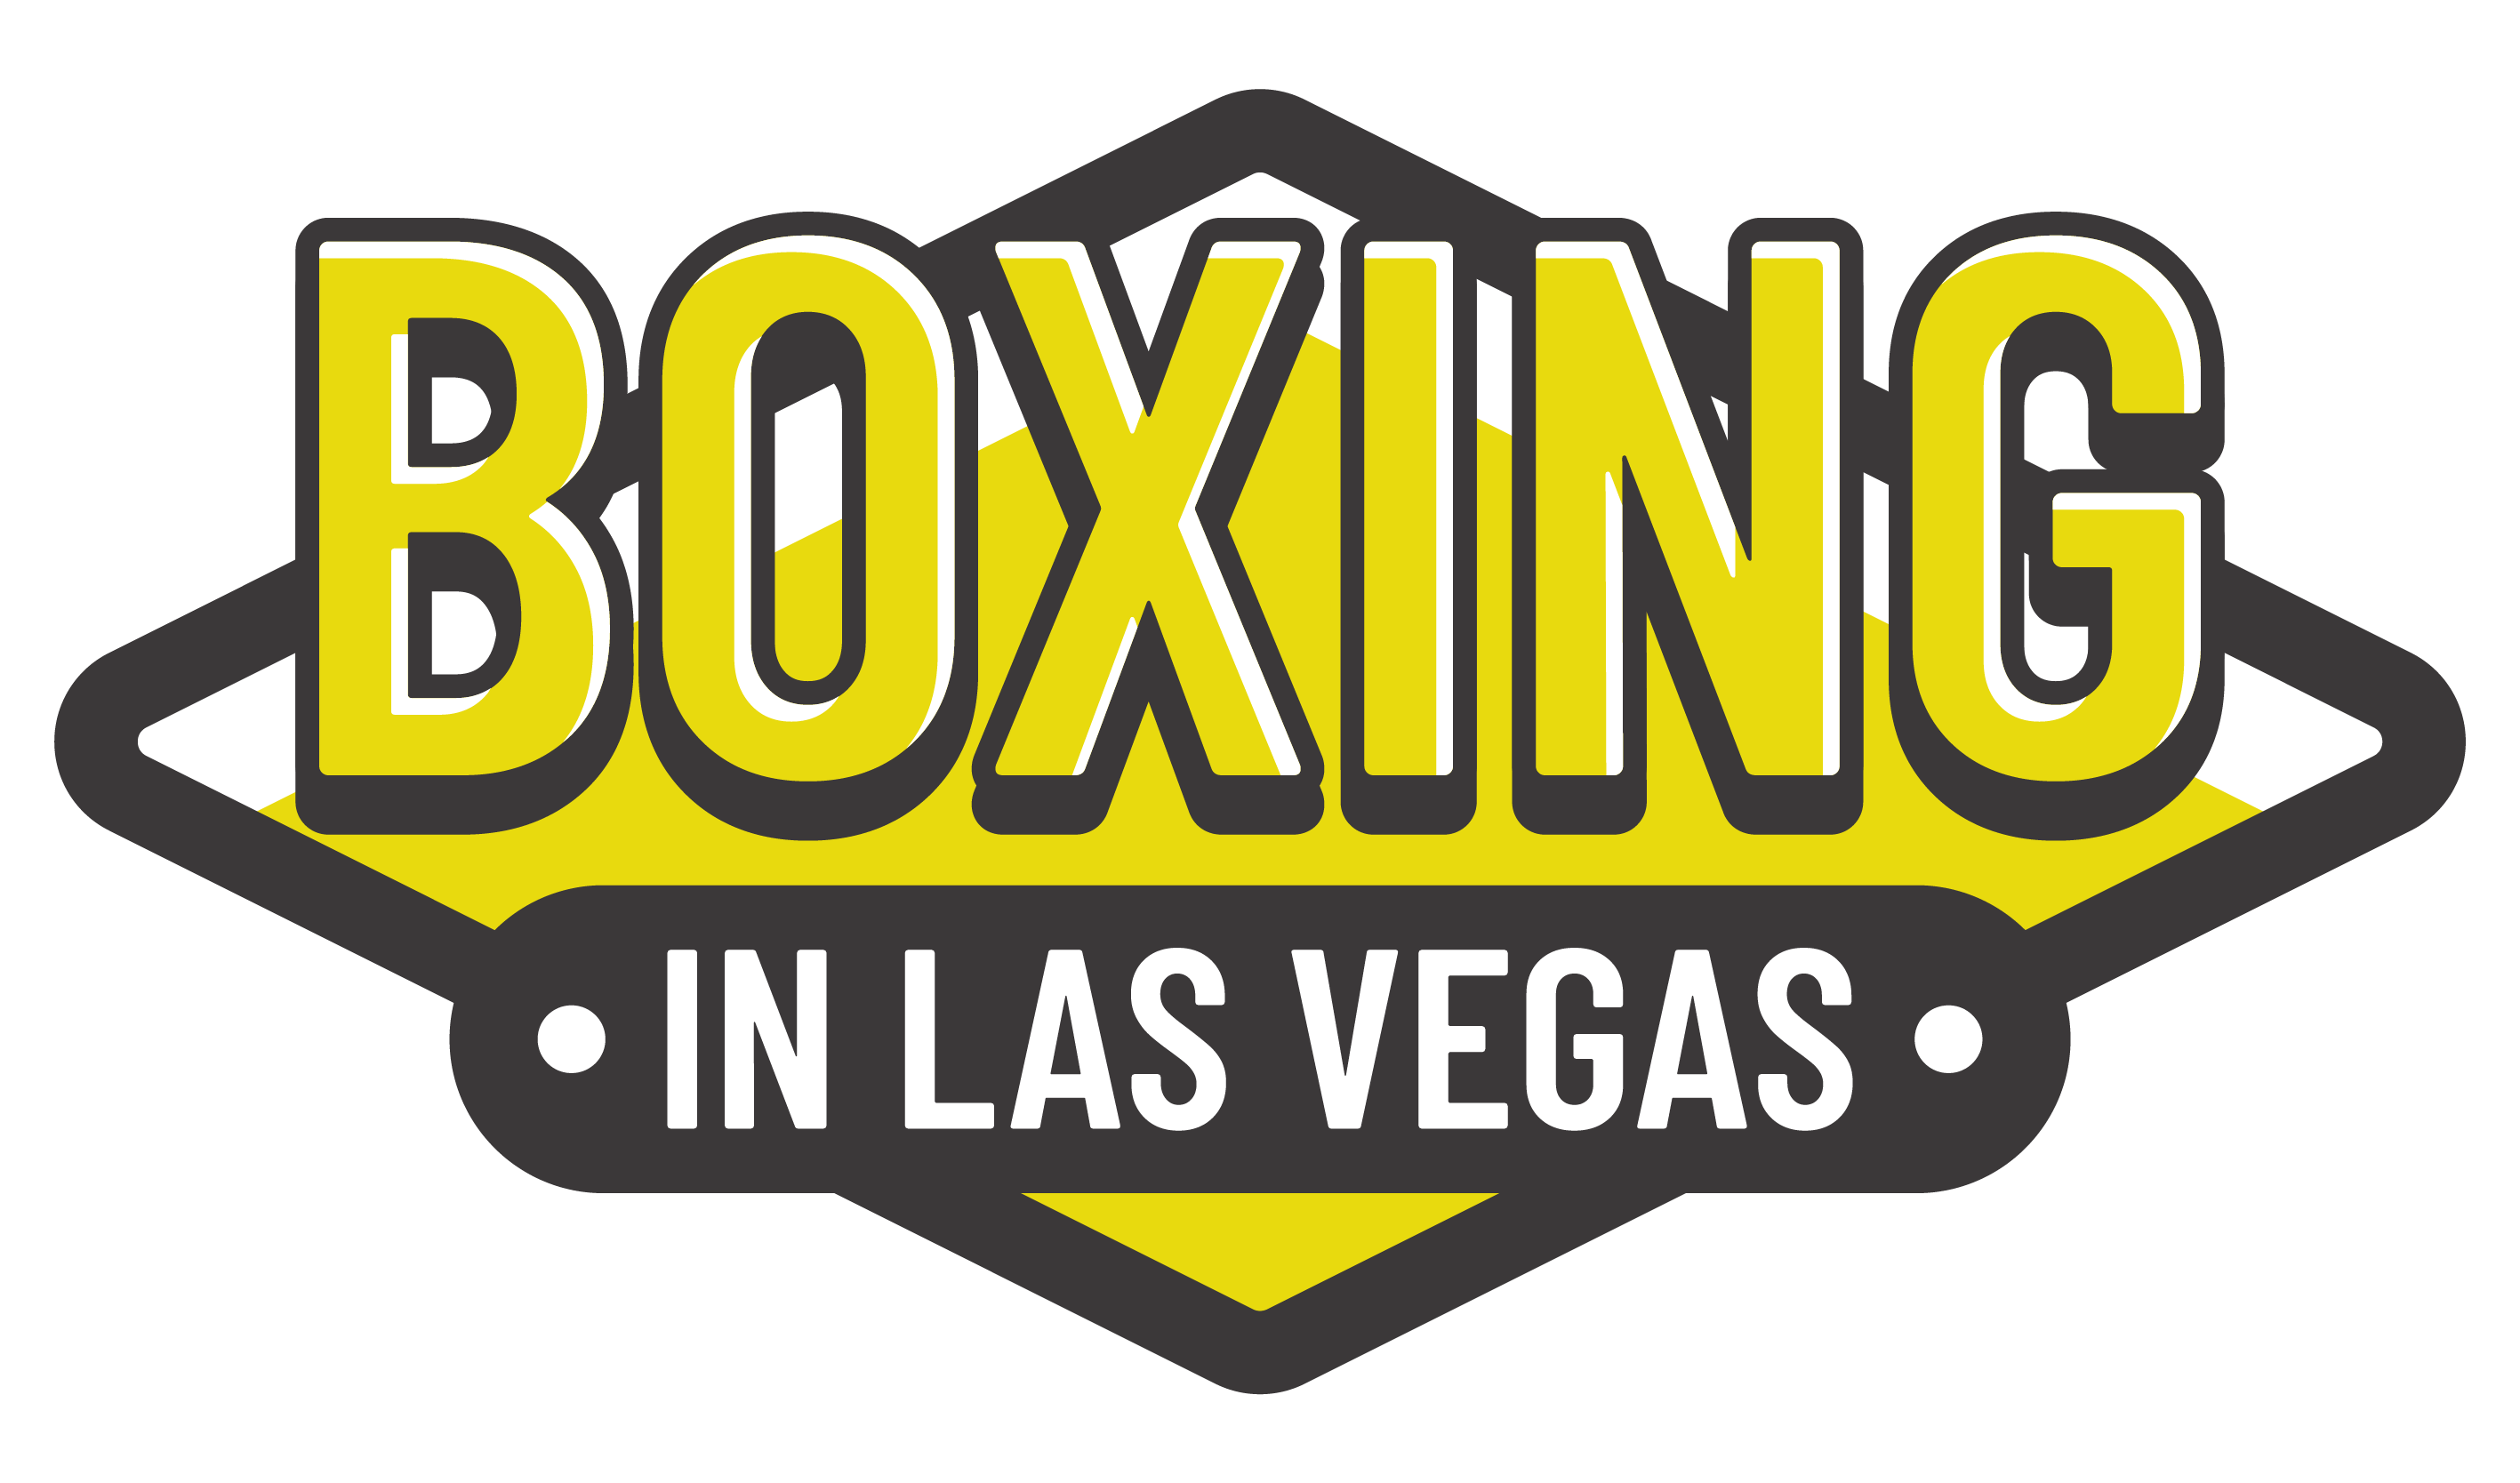 Las Vegas Fight Schedule All The Top Boxing & MMA in Las Vegas